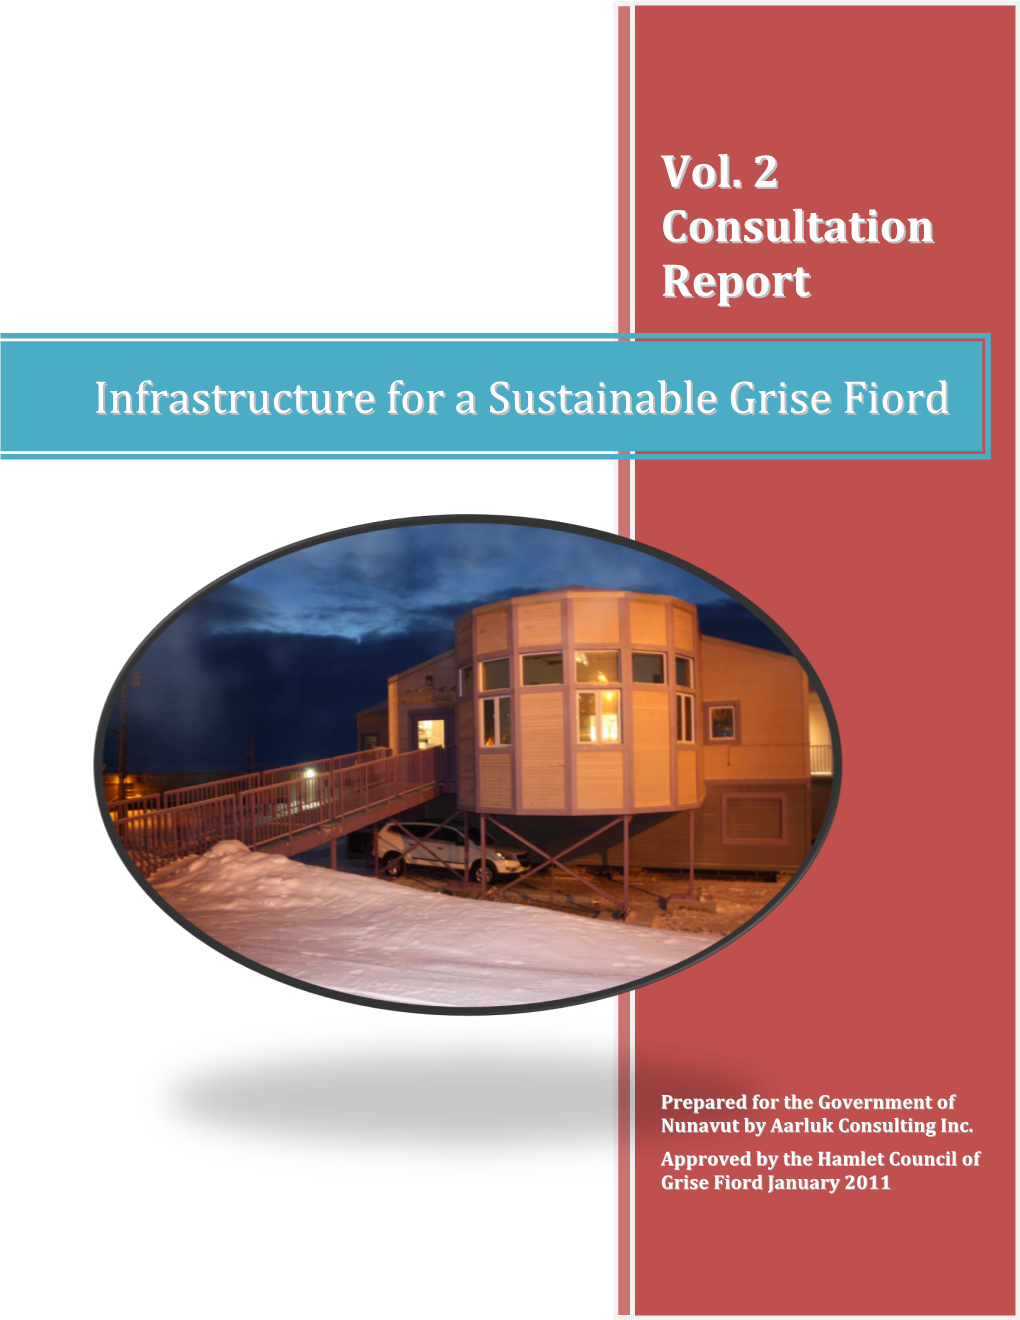 Infrastructure for a Sustainable Grise Fiord Vol. 2 Consultation Report